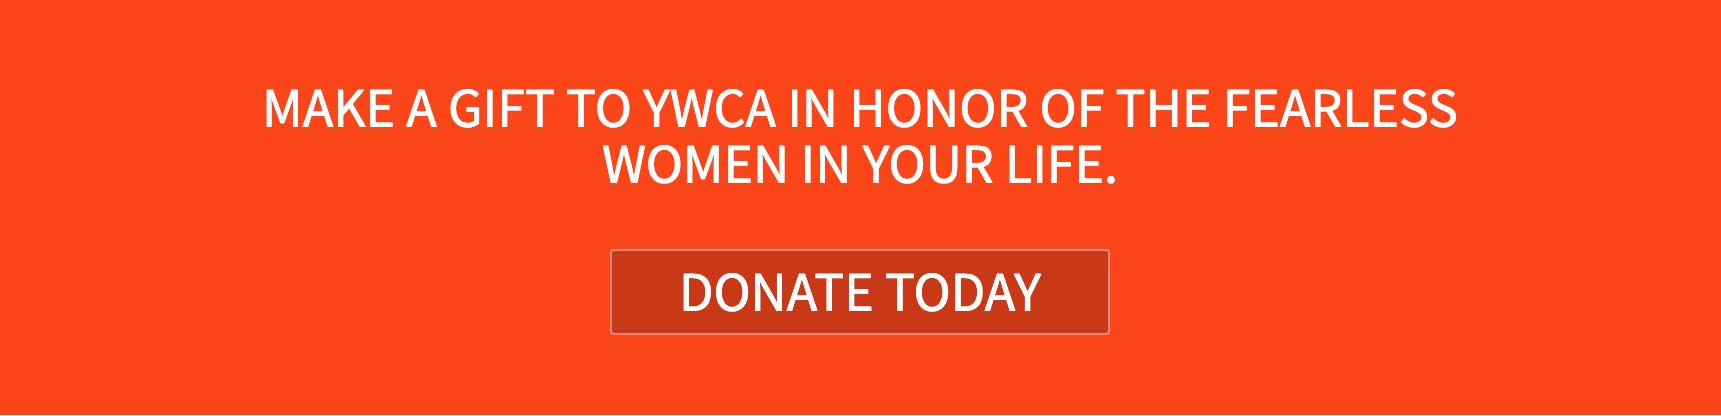 Make a gift to YWCA in honor of the fearless women in your life.